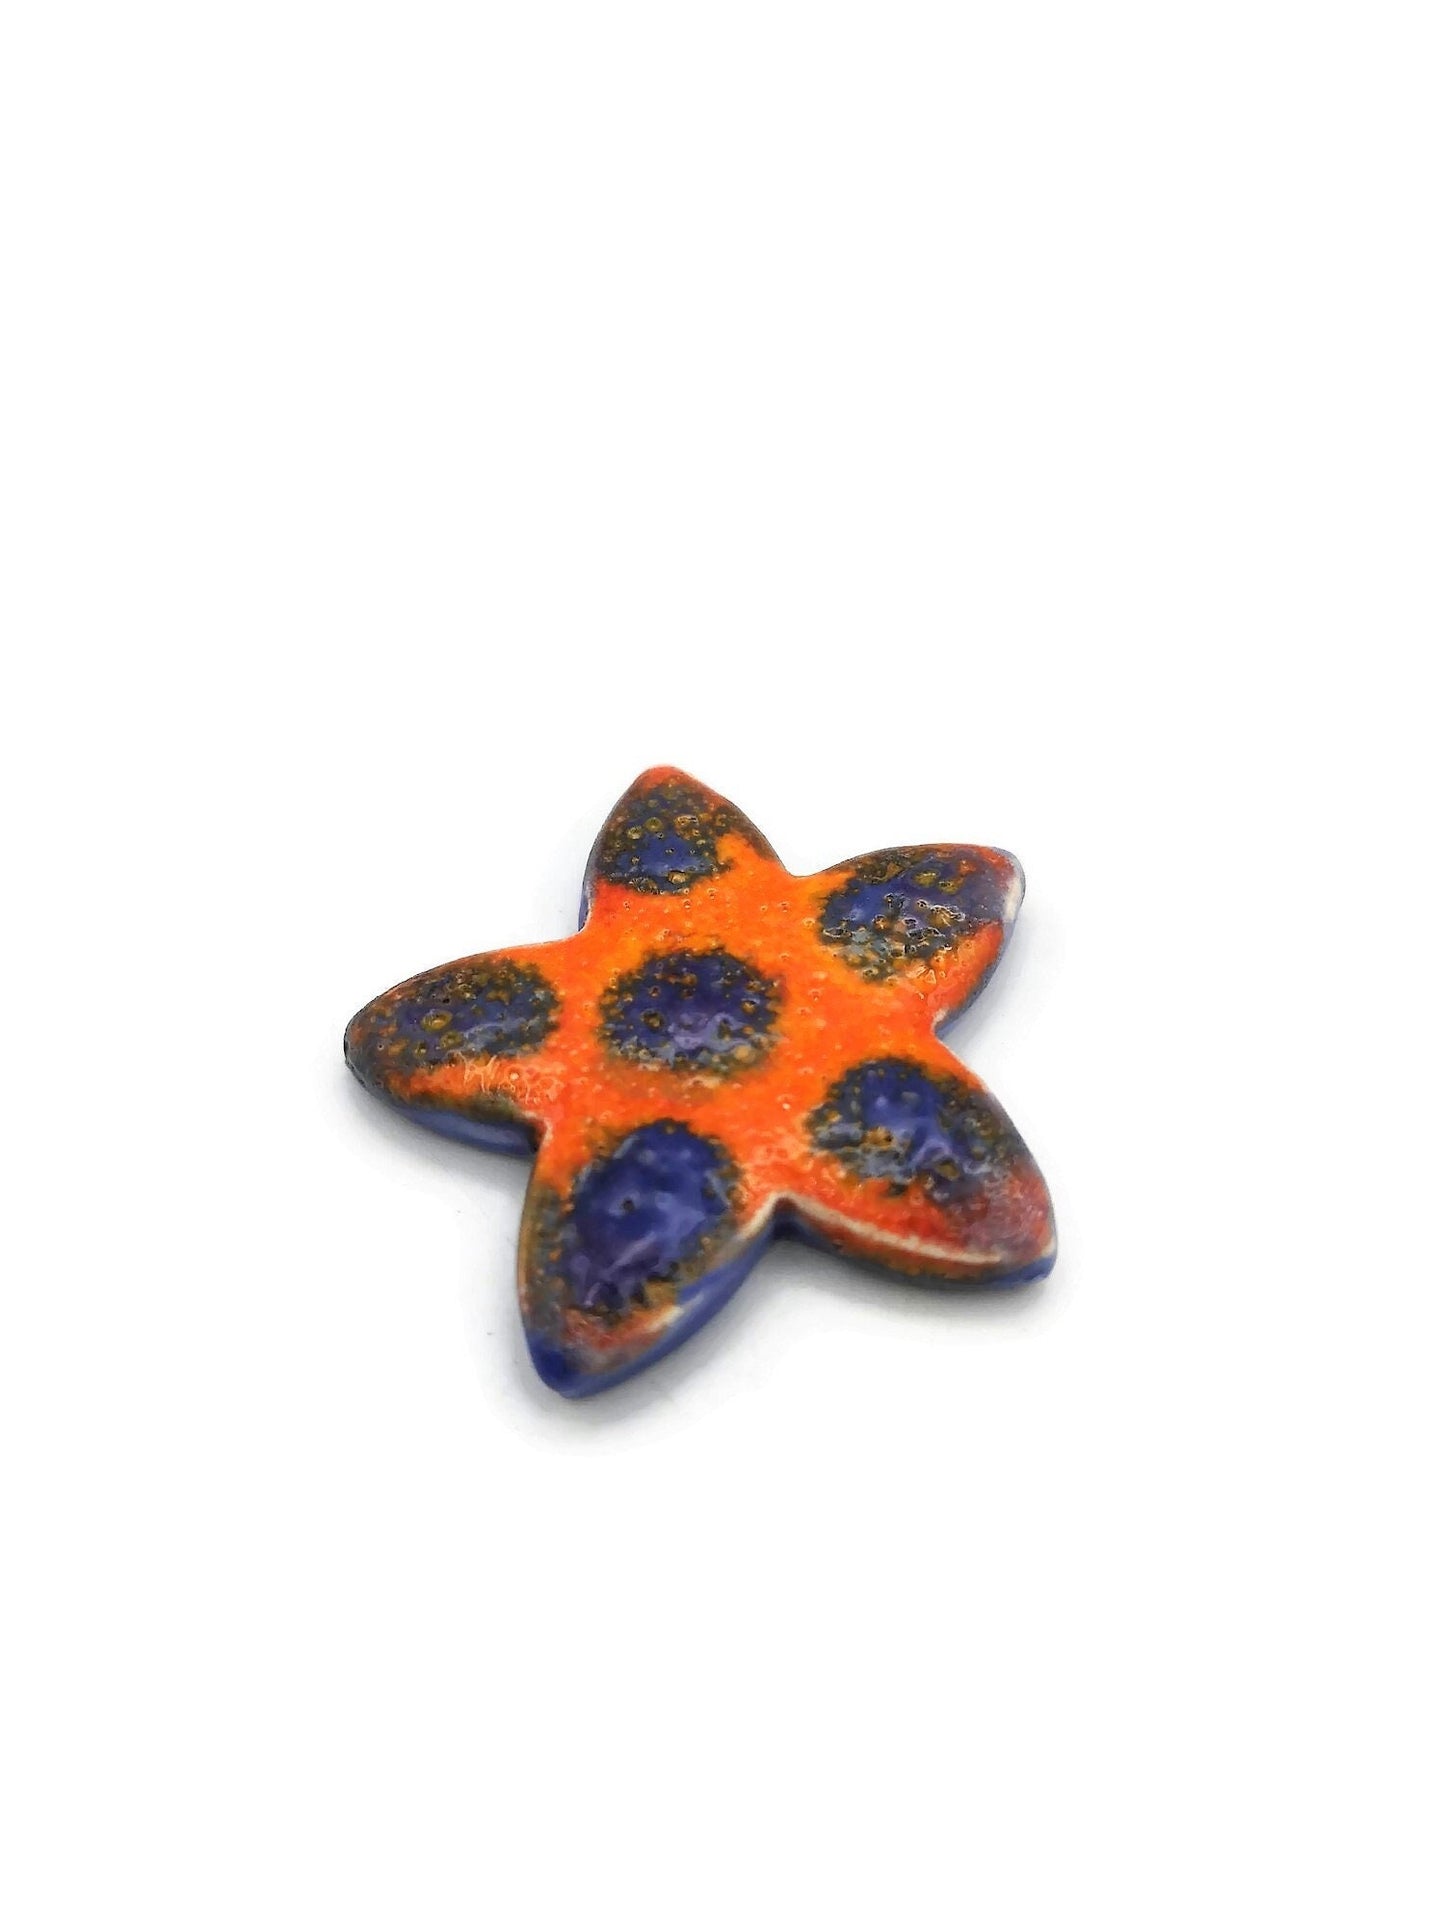 Large Flower Brooch For Women, Celestial Statement Brooch, Handmade Ceramic Star Jewelry For Her, Orange And Blue Broach Pin - Ceramica Ana Rafael